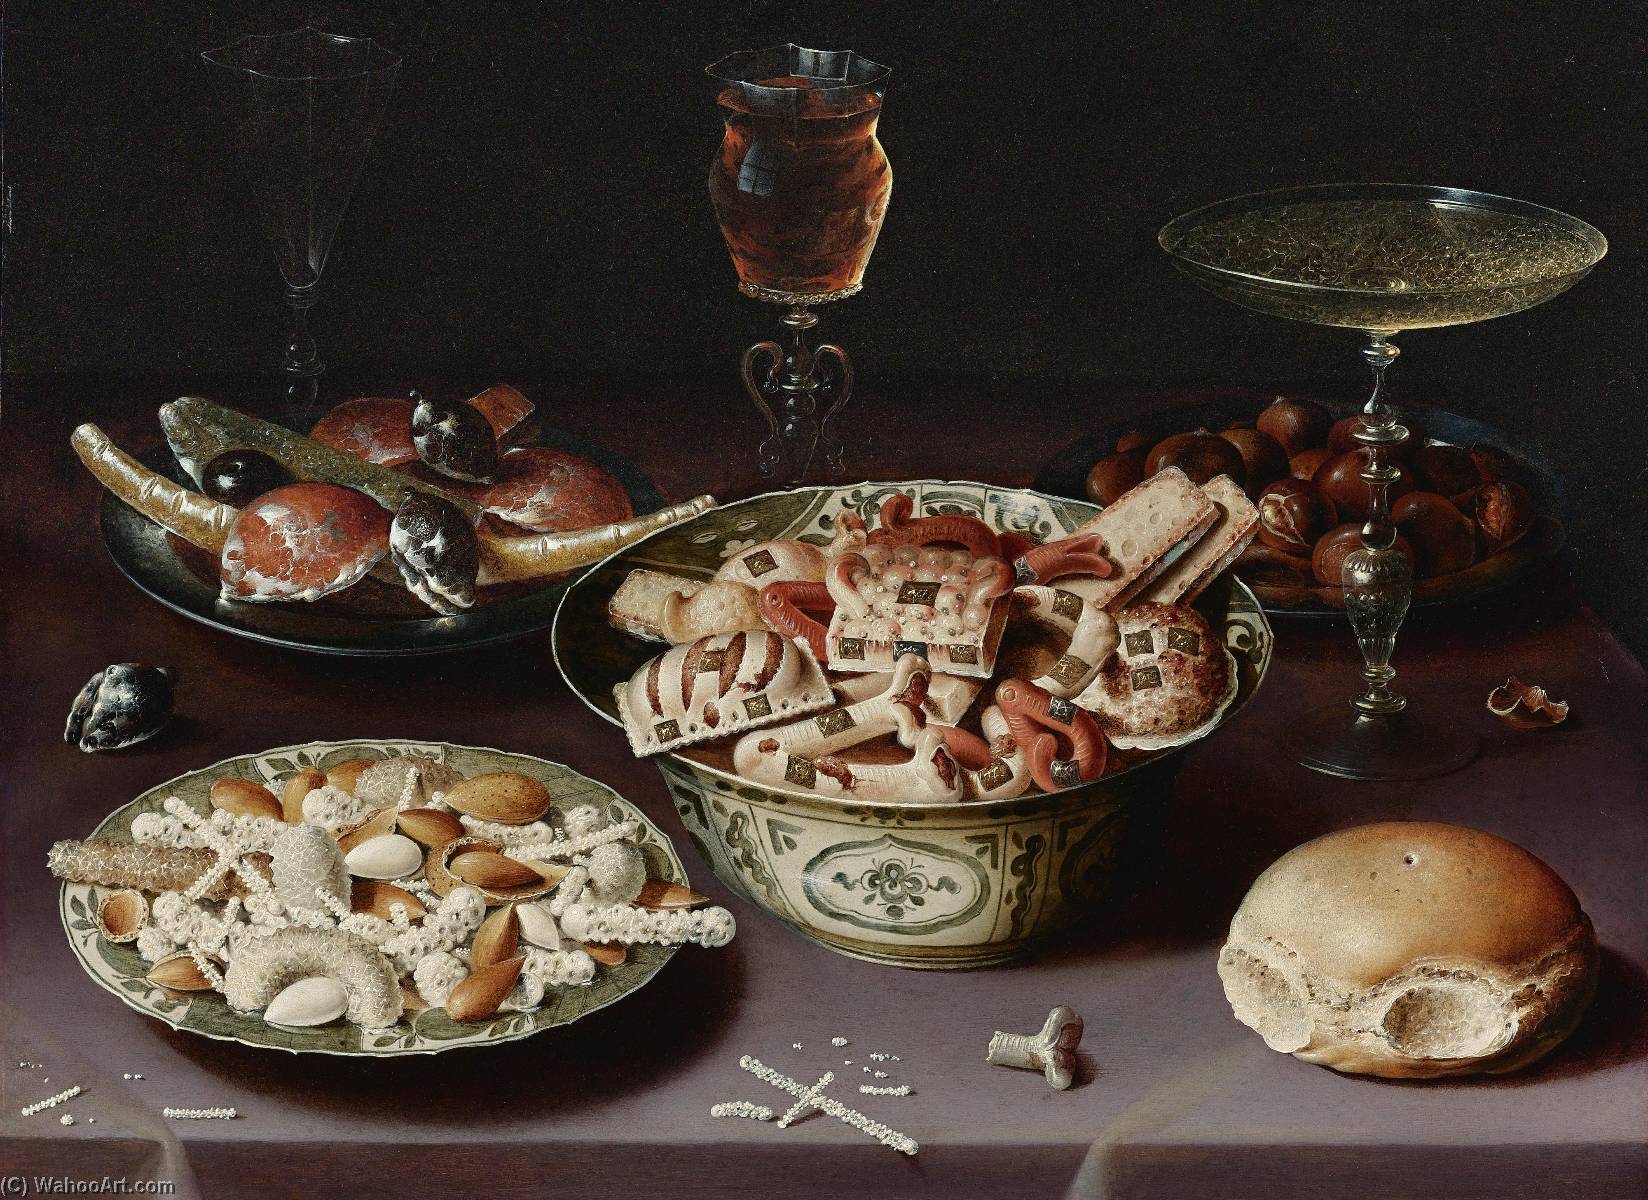 WikiOO.org - 백과 사전 - 회화, 삽화 Osias Beert The Elder - a still life of porcelain vessels containing sweets, pewter plates bearing sweets and chestnuts, three pieces of glassware and a bread roll on a table draped with a mauve cloth